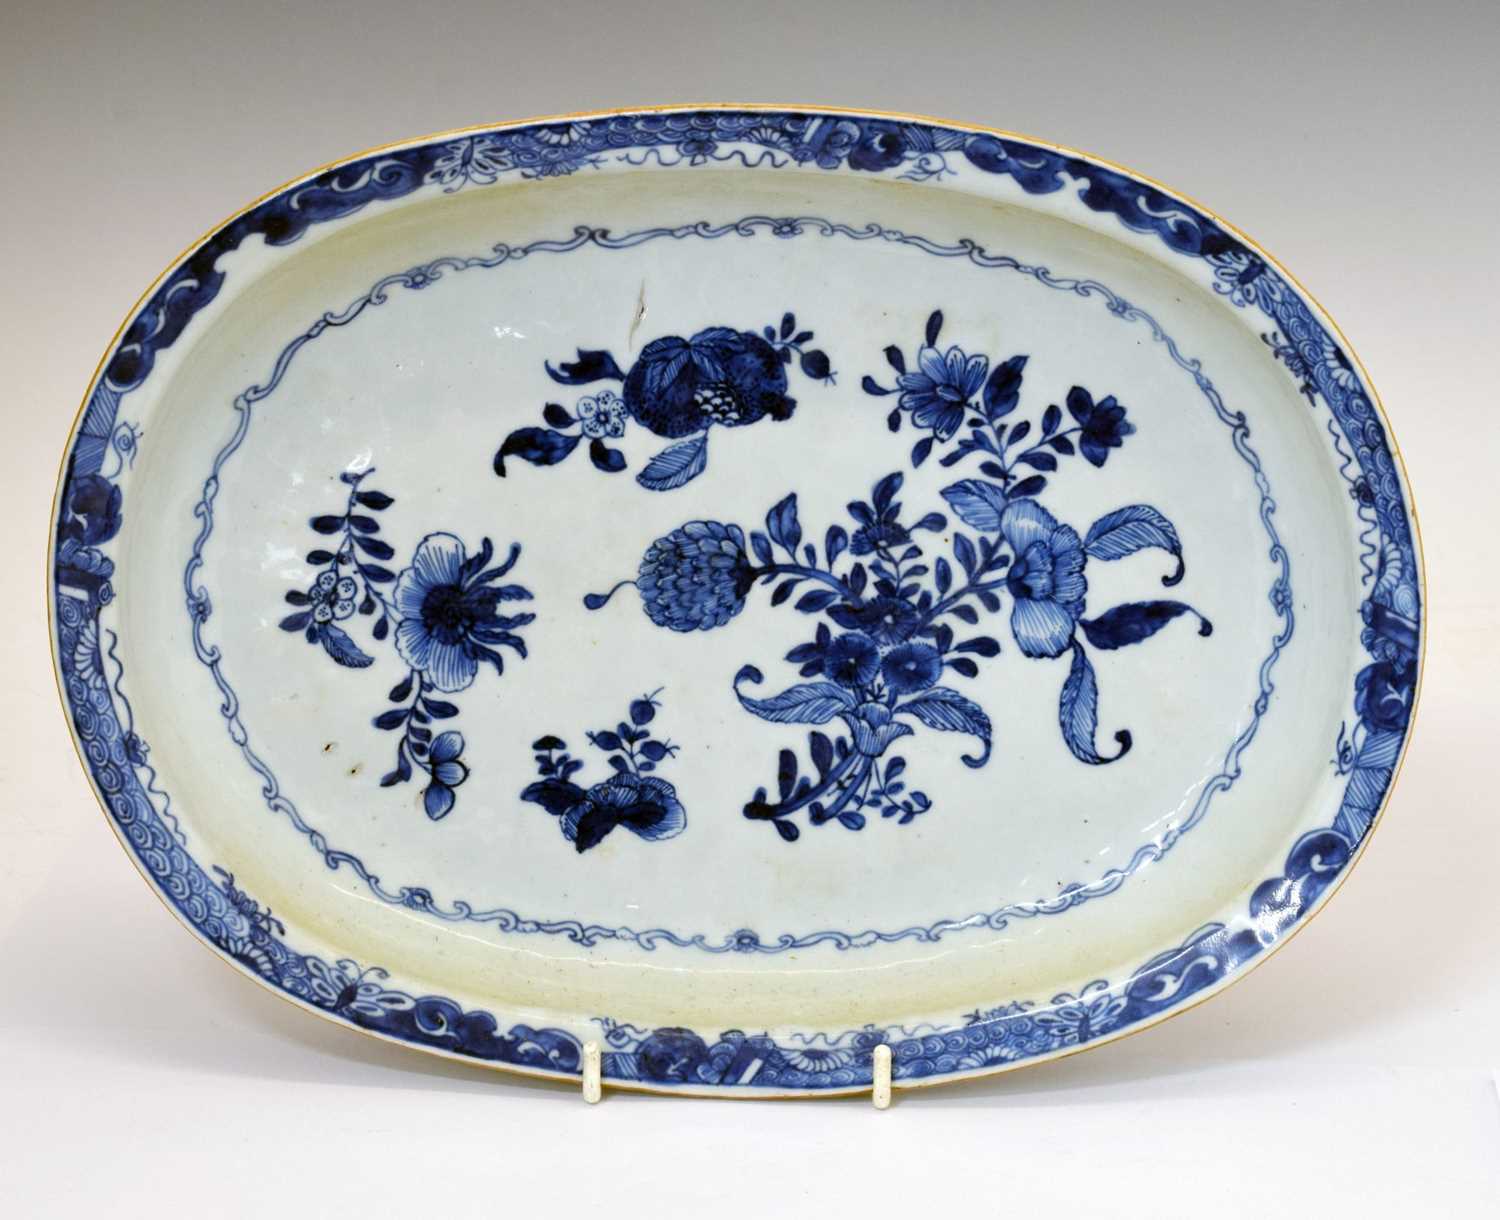 Chinese export porcelain blue and white oval dish